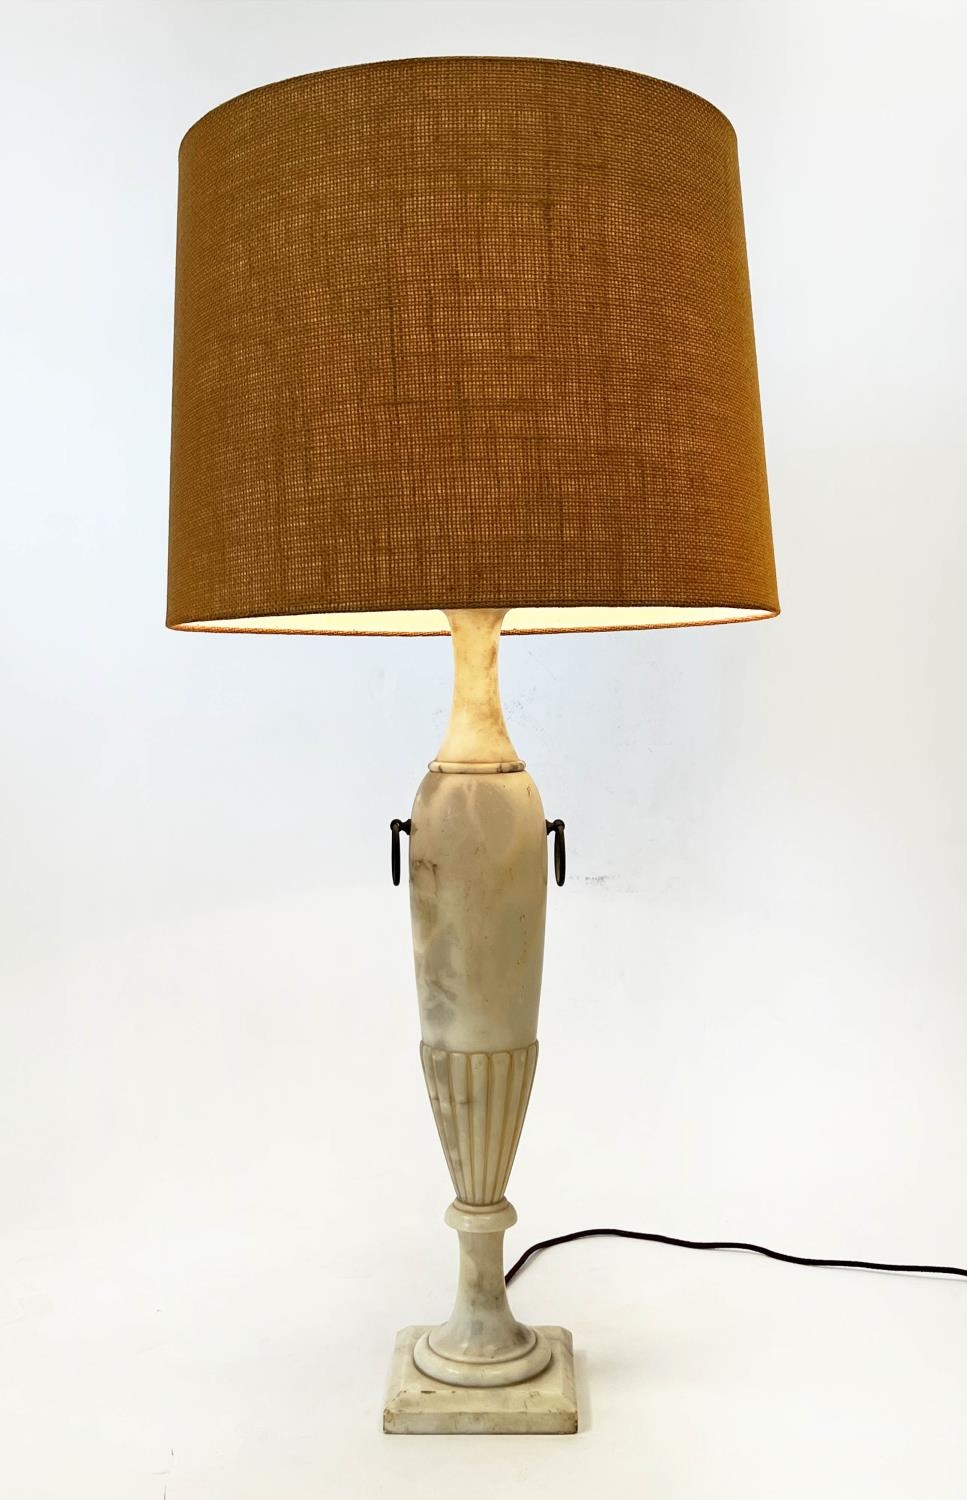 TABLE LAMP, Italian Grand Tour style, hand carved Alabaster, early/mid 20th century, with shade, - Image 3 of 5